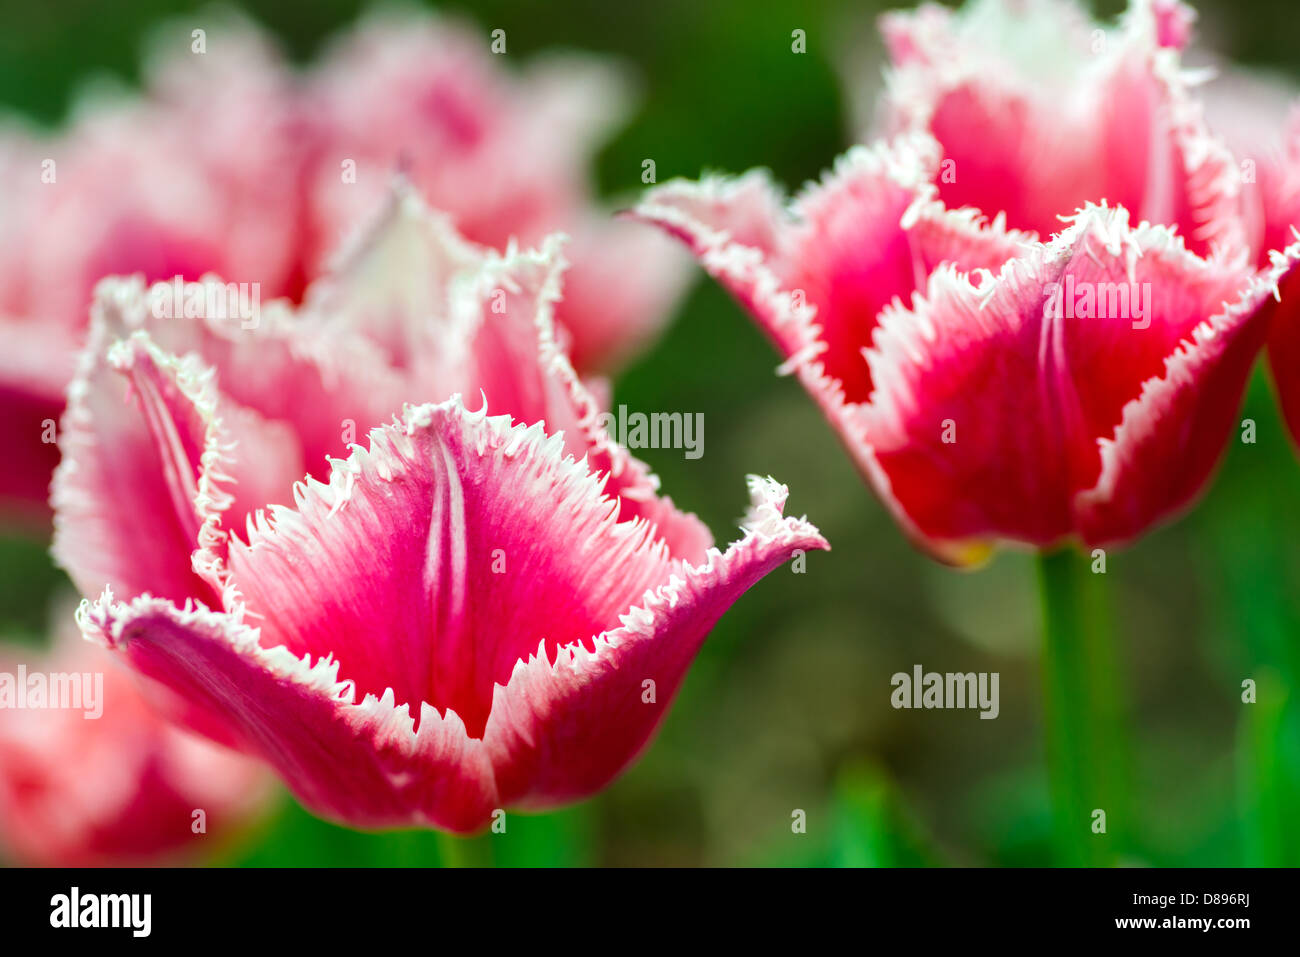 Flowers: two fresh red tulips on natural blurred background, low DOF, soft focus close-up shot. Stock Photo